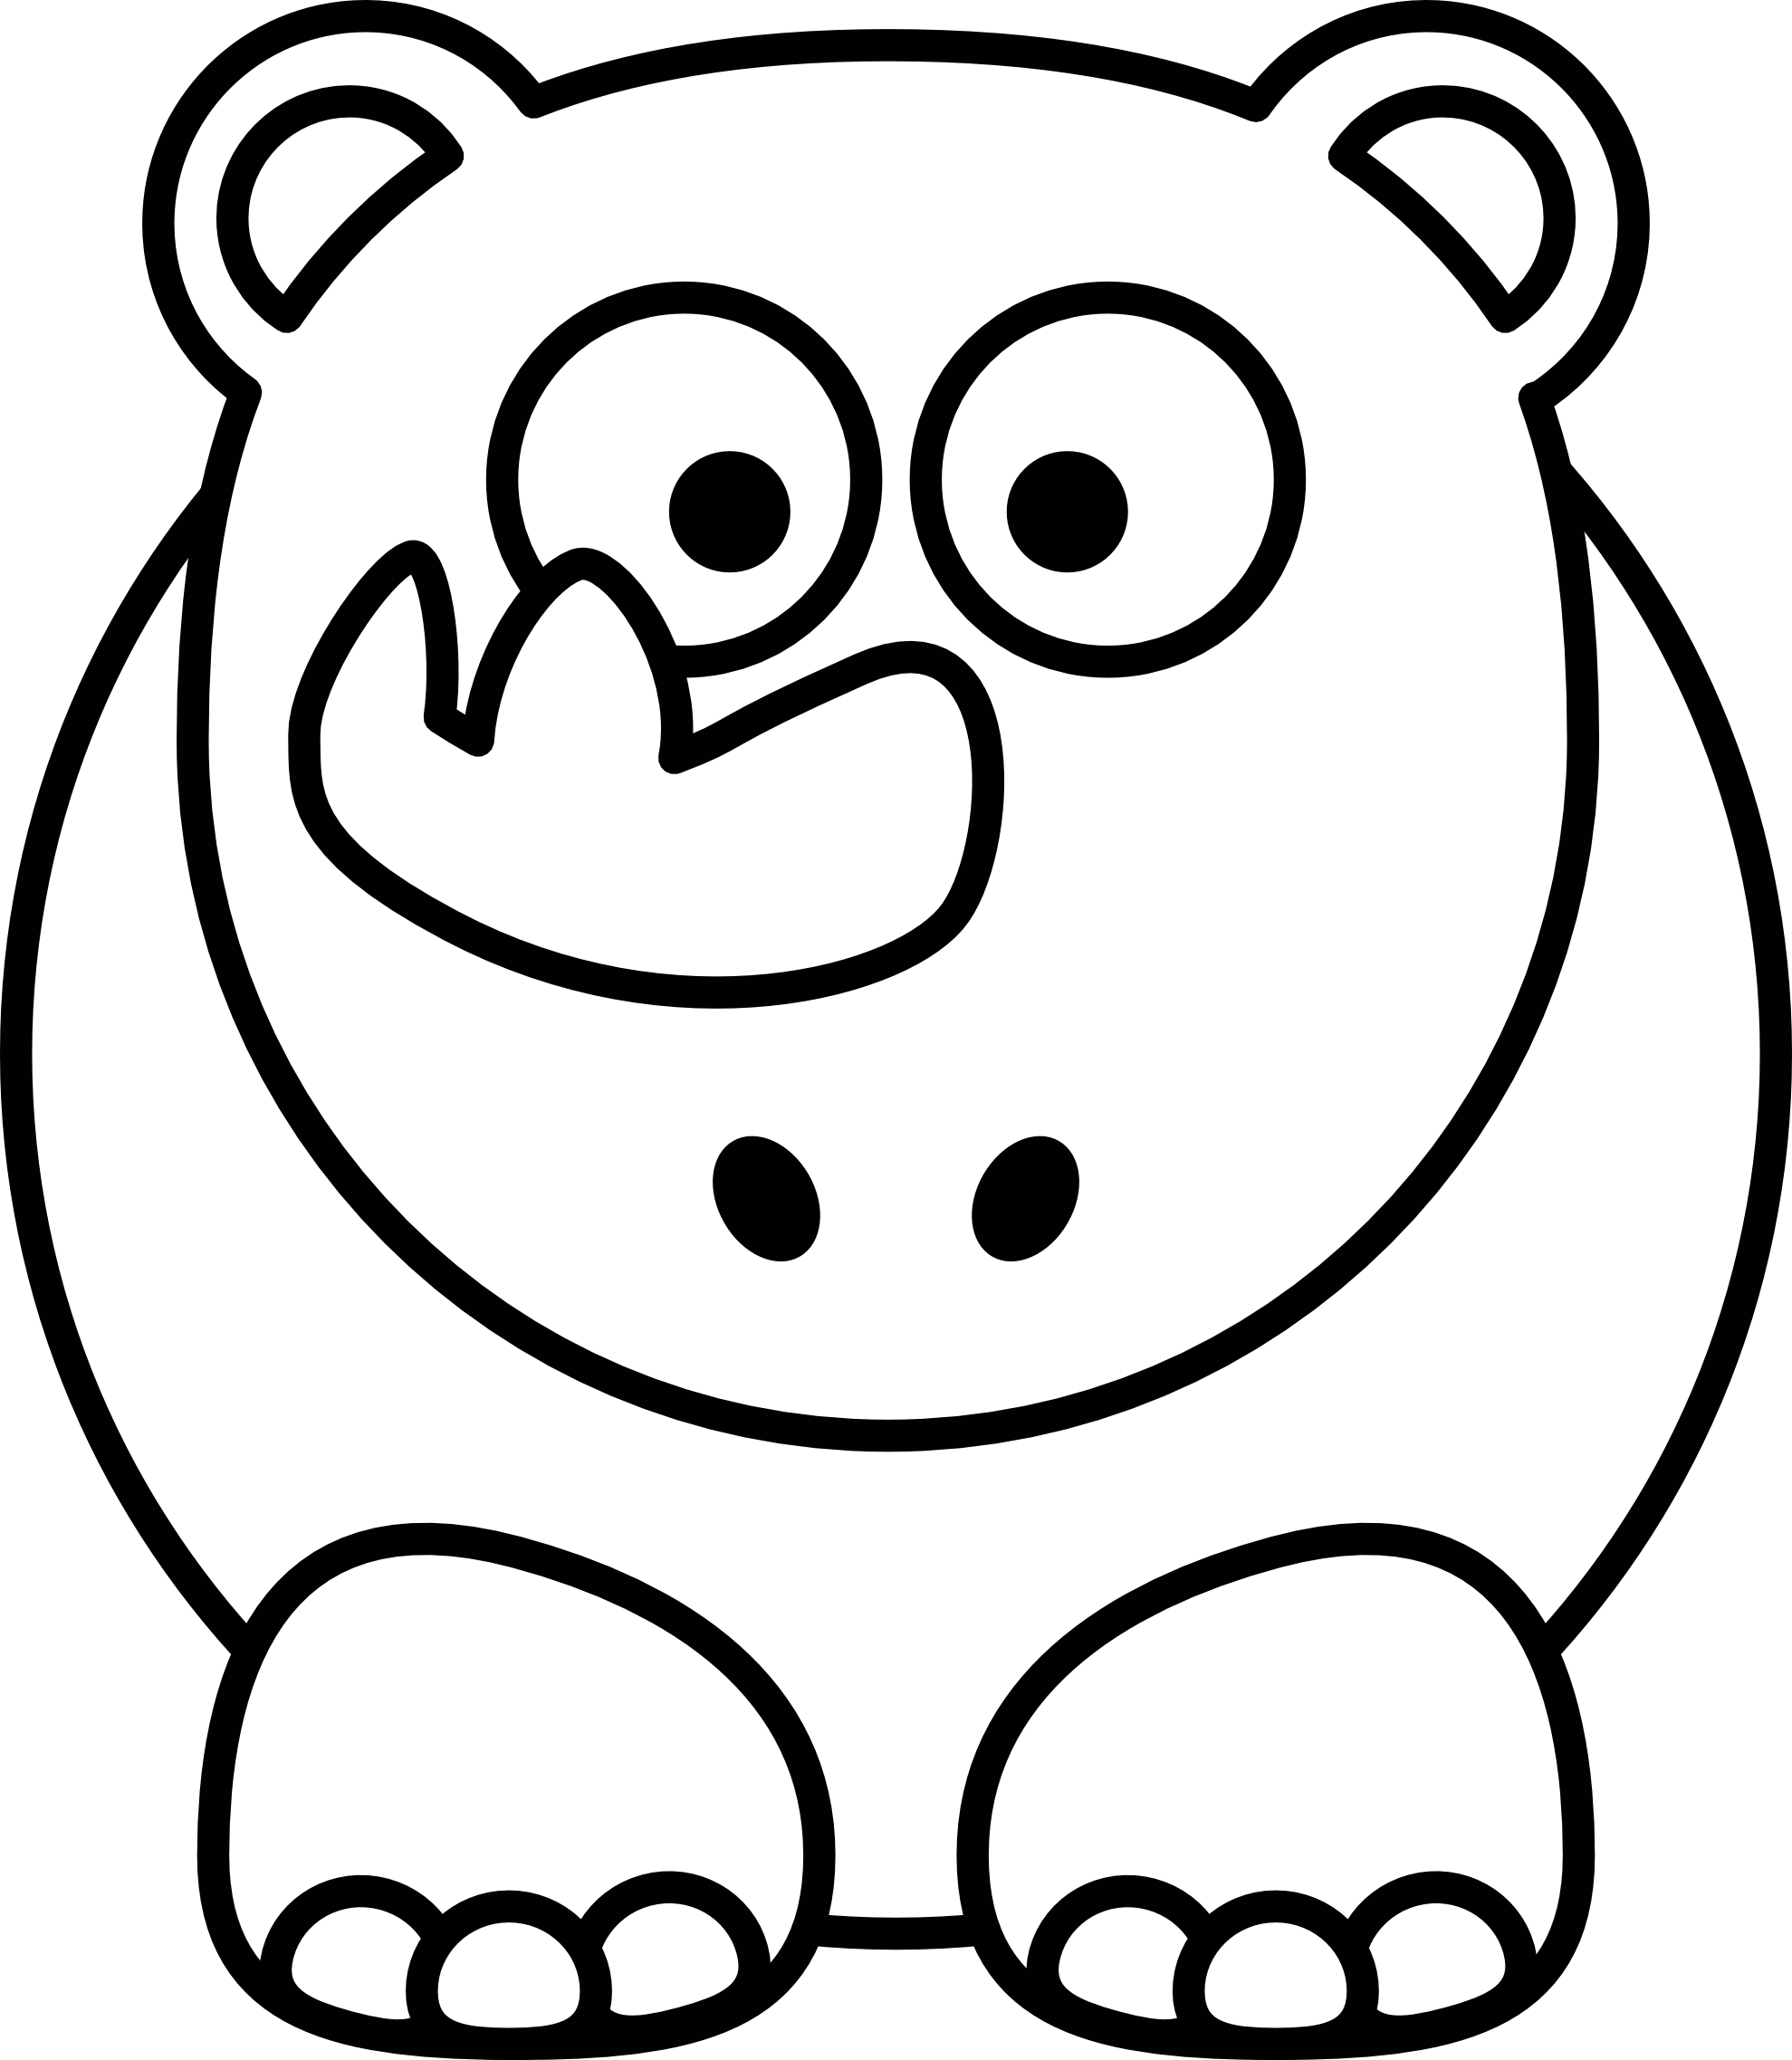 Free Black And White Cartoon Animals, Download Free Clip Art.